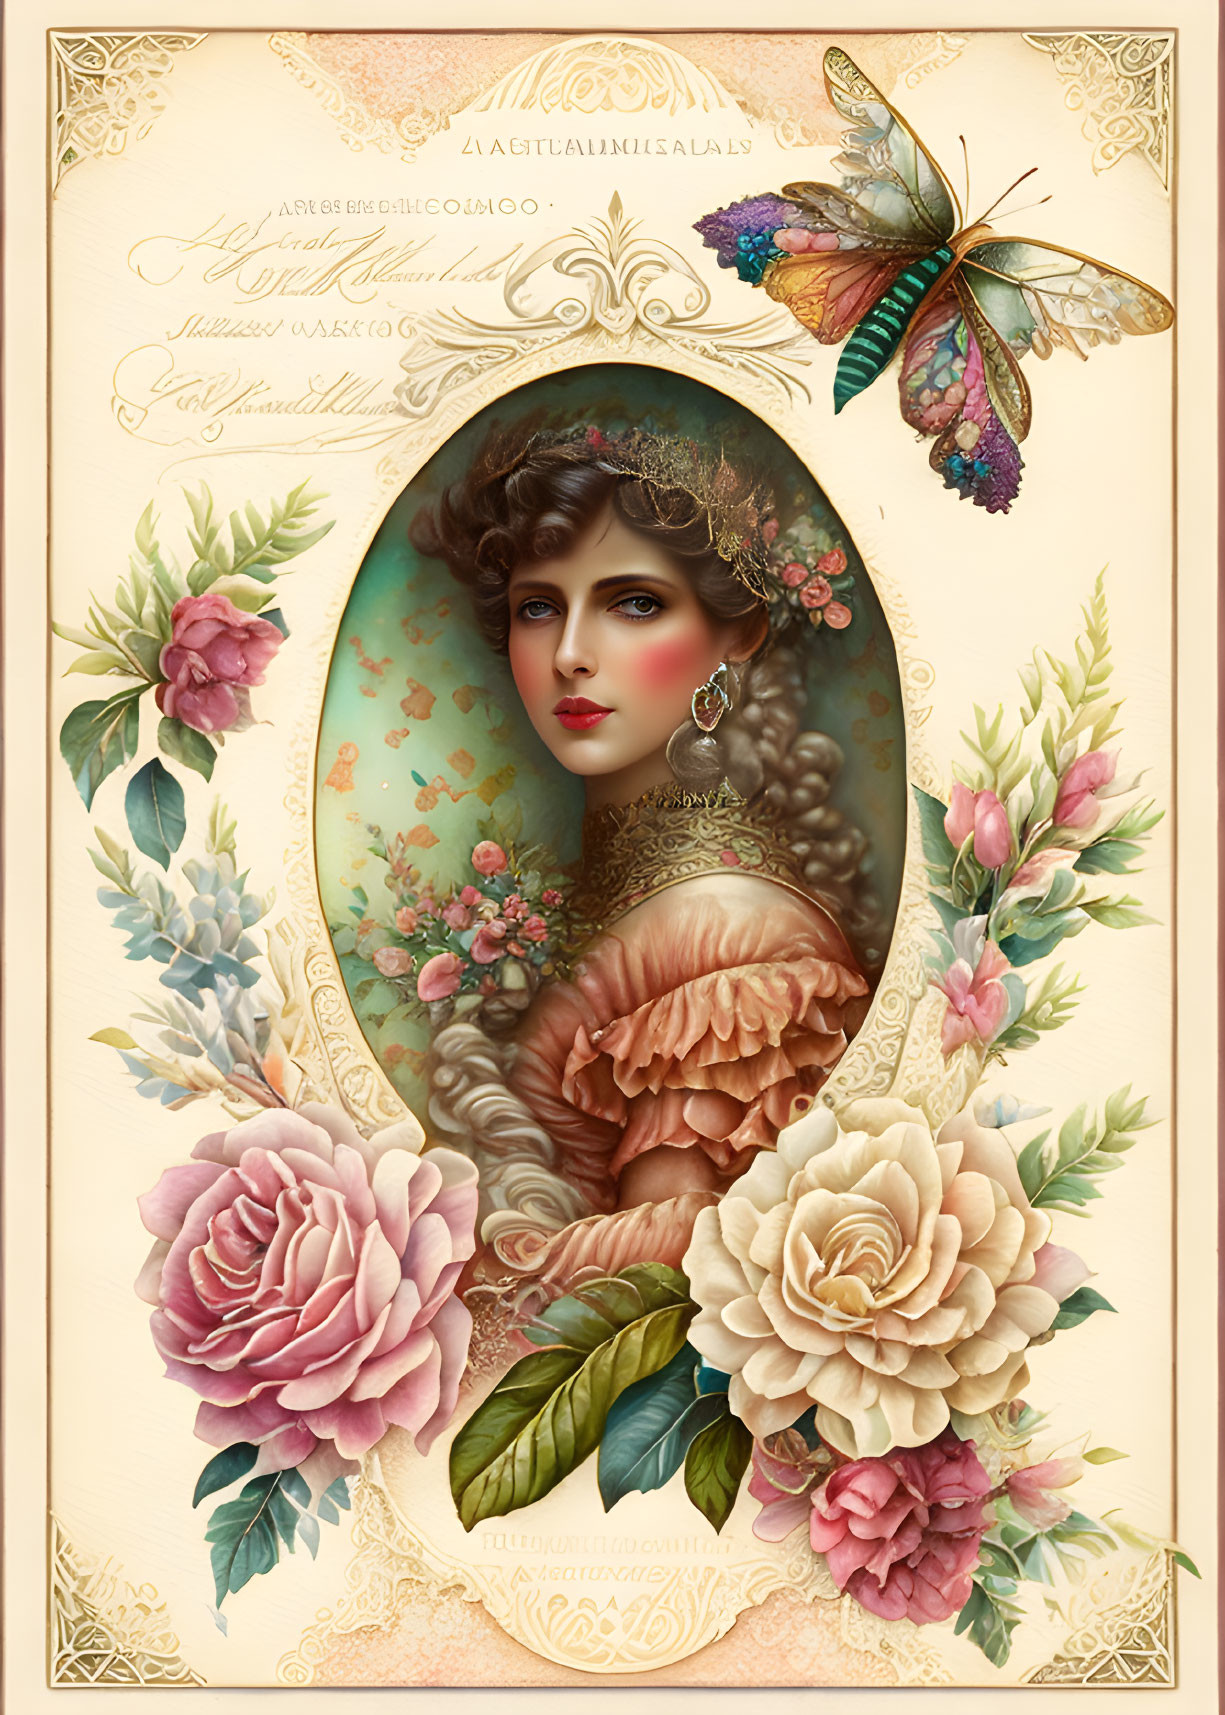 Vintage-style illustration of woman in ornate dress and hat with floral motifs and butterfly on aged parchment.